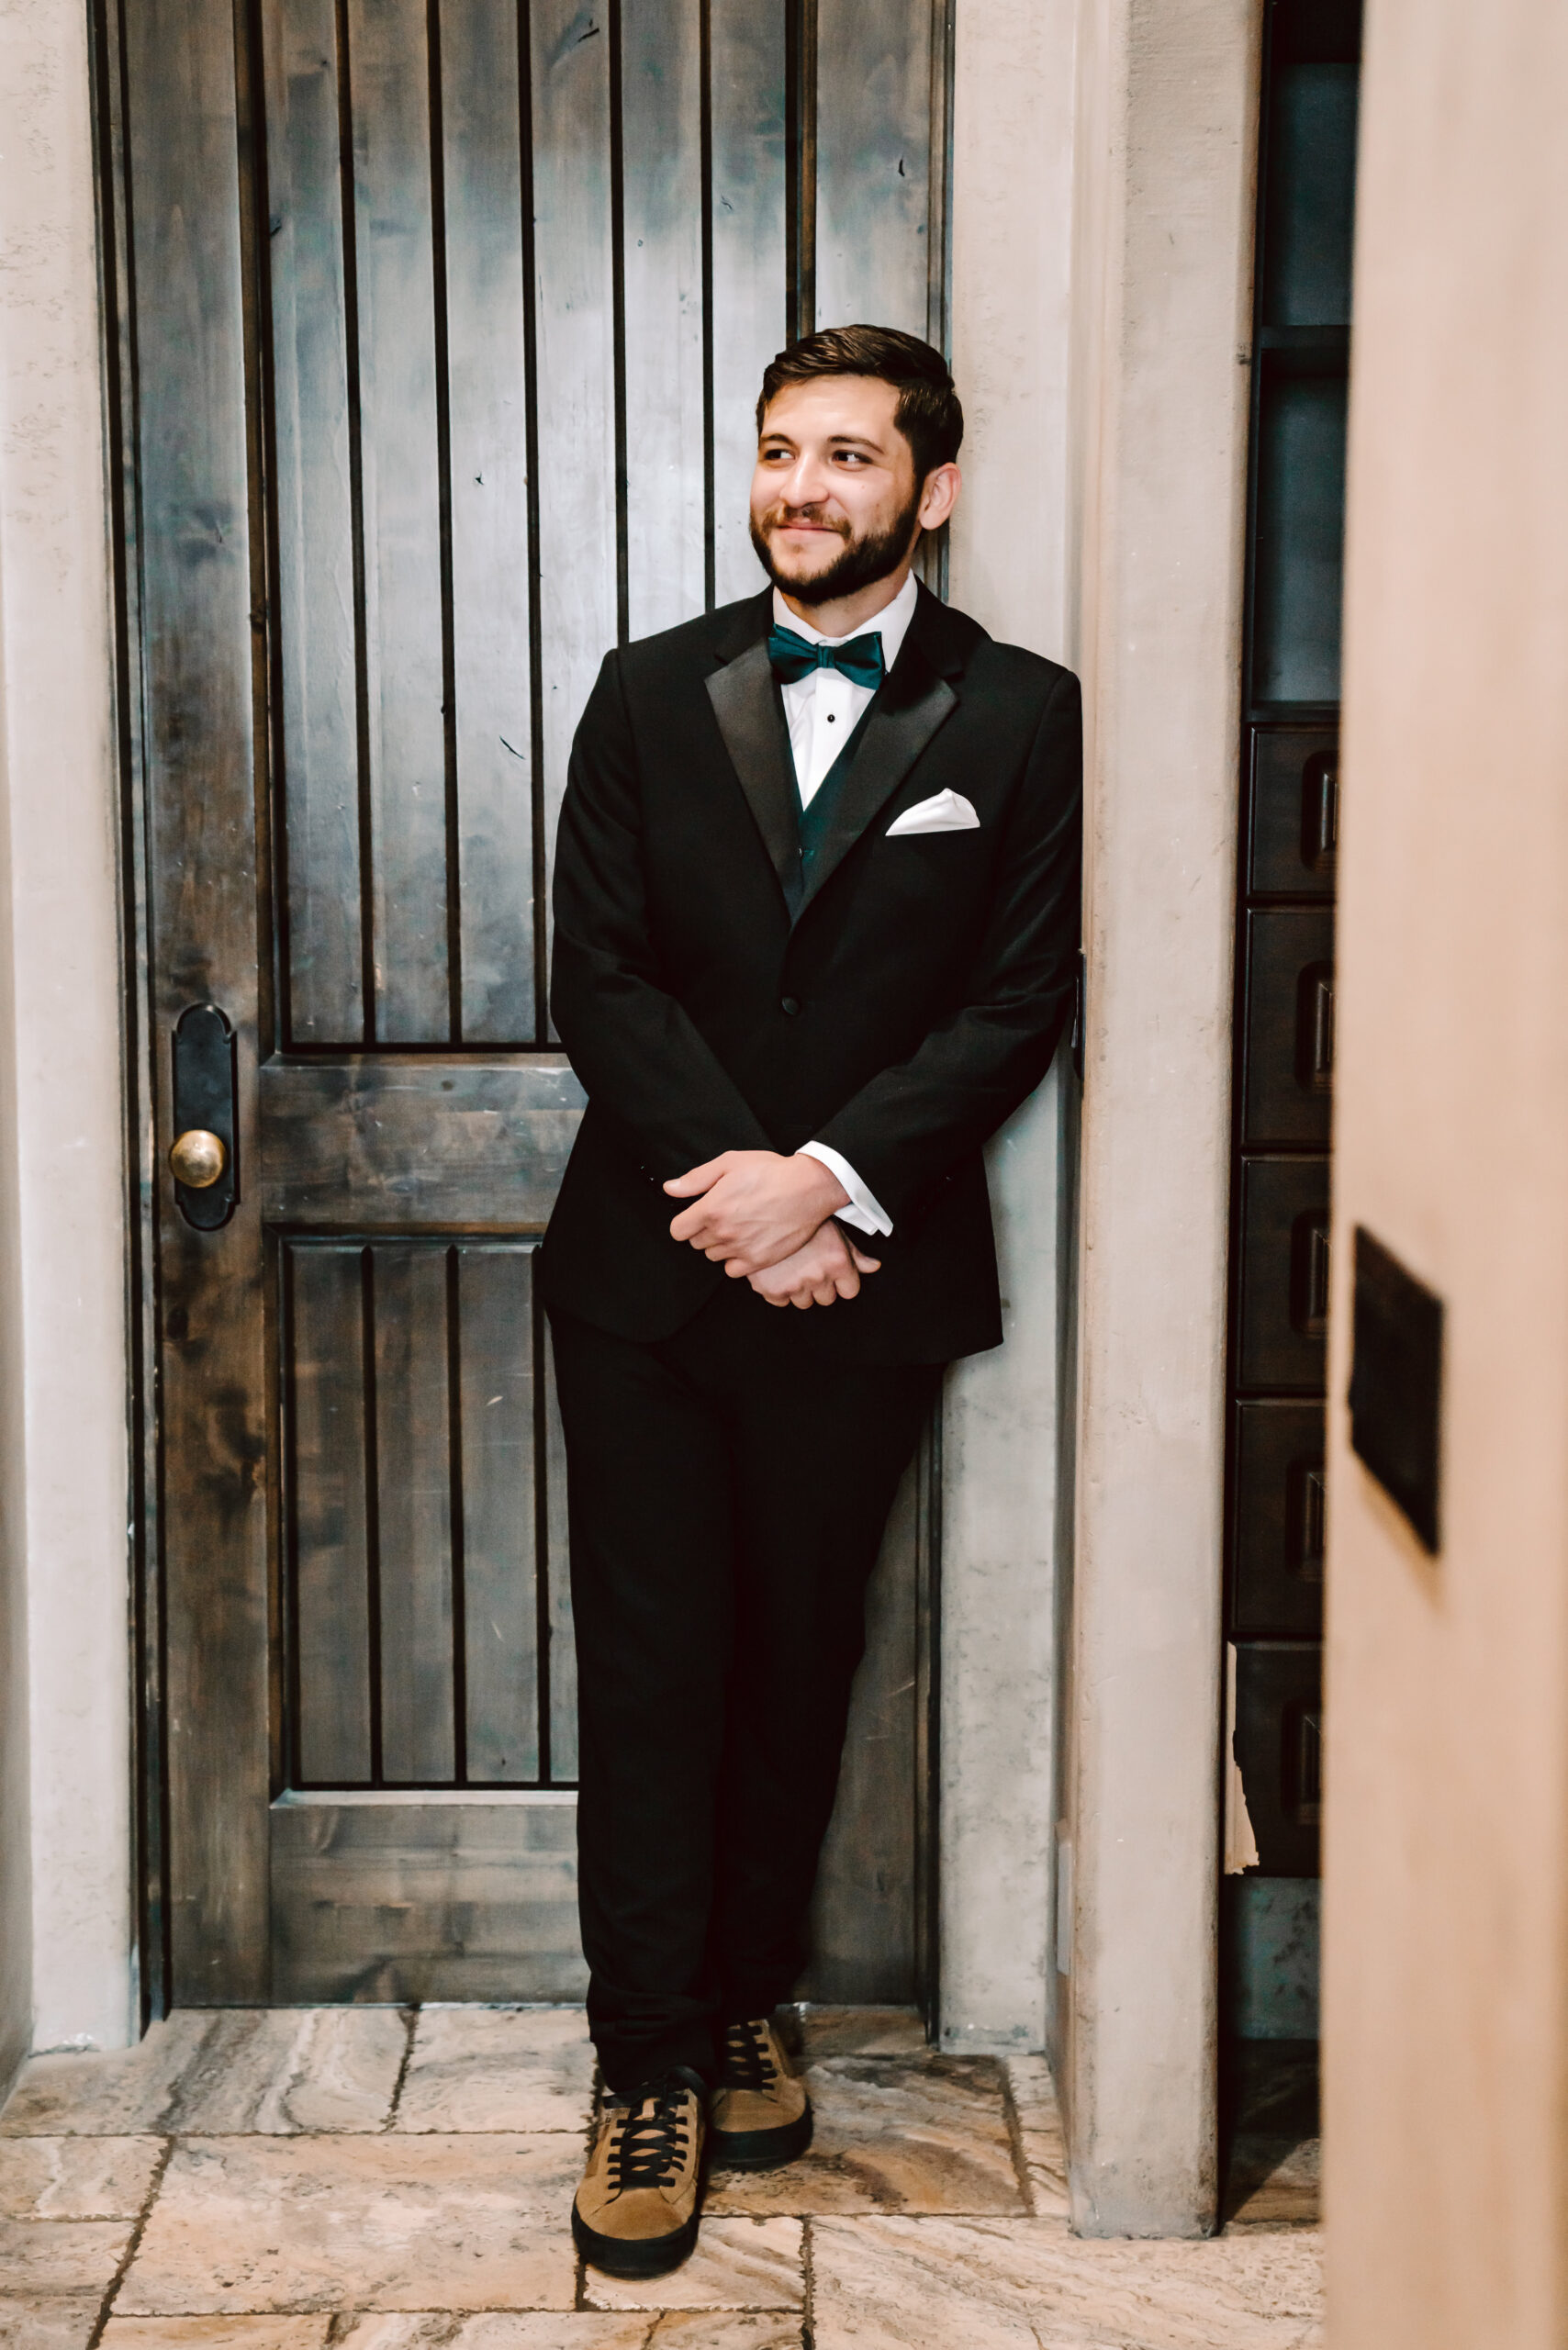 A groom in a traditional black tux